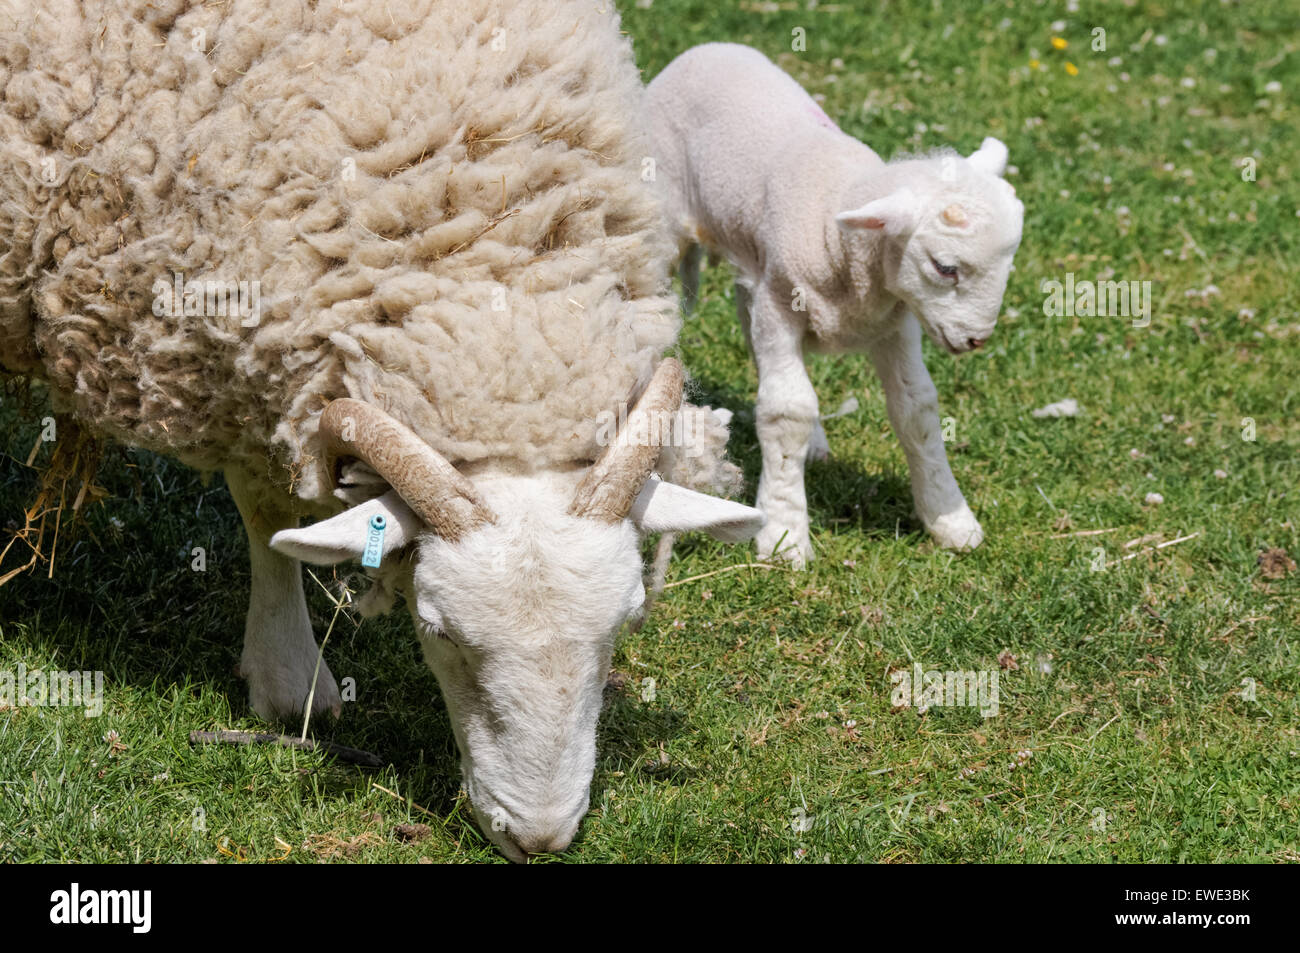 sheep with two lambs on pasture Stock Photo